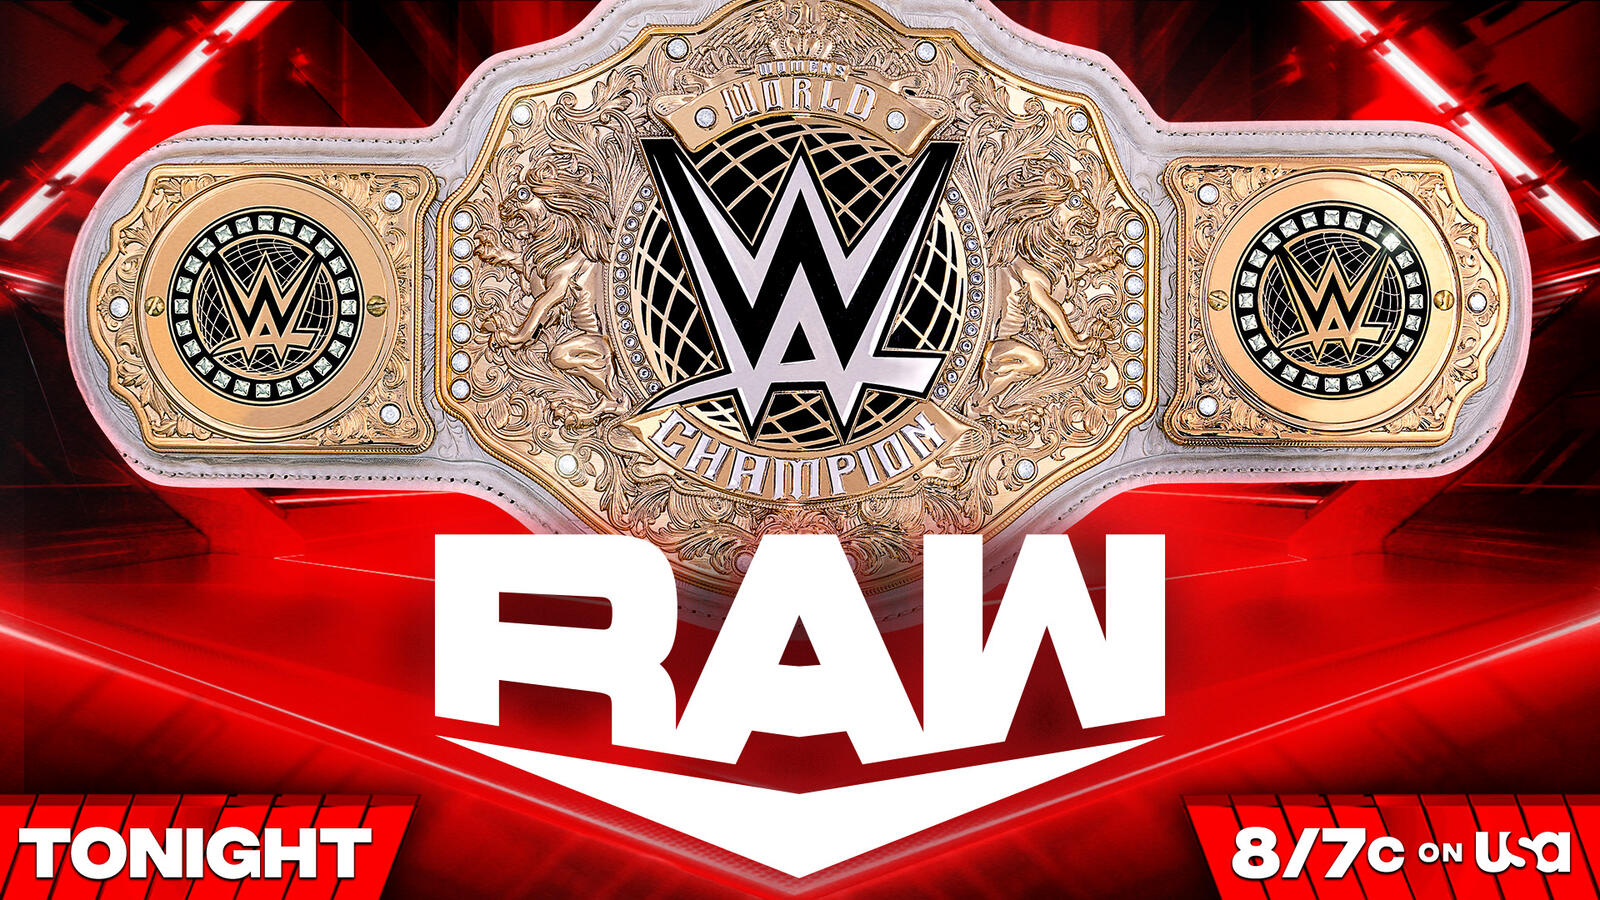 Becky Lynch Set to Make RAW Return for Tonight’s Battle Royal to Crown New Women’s World Champion